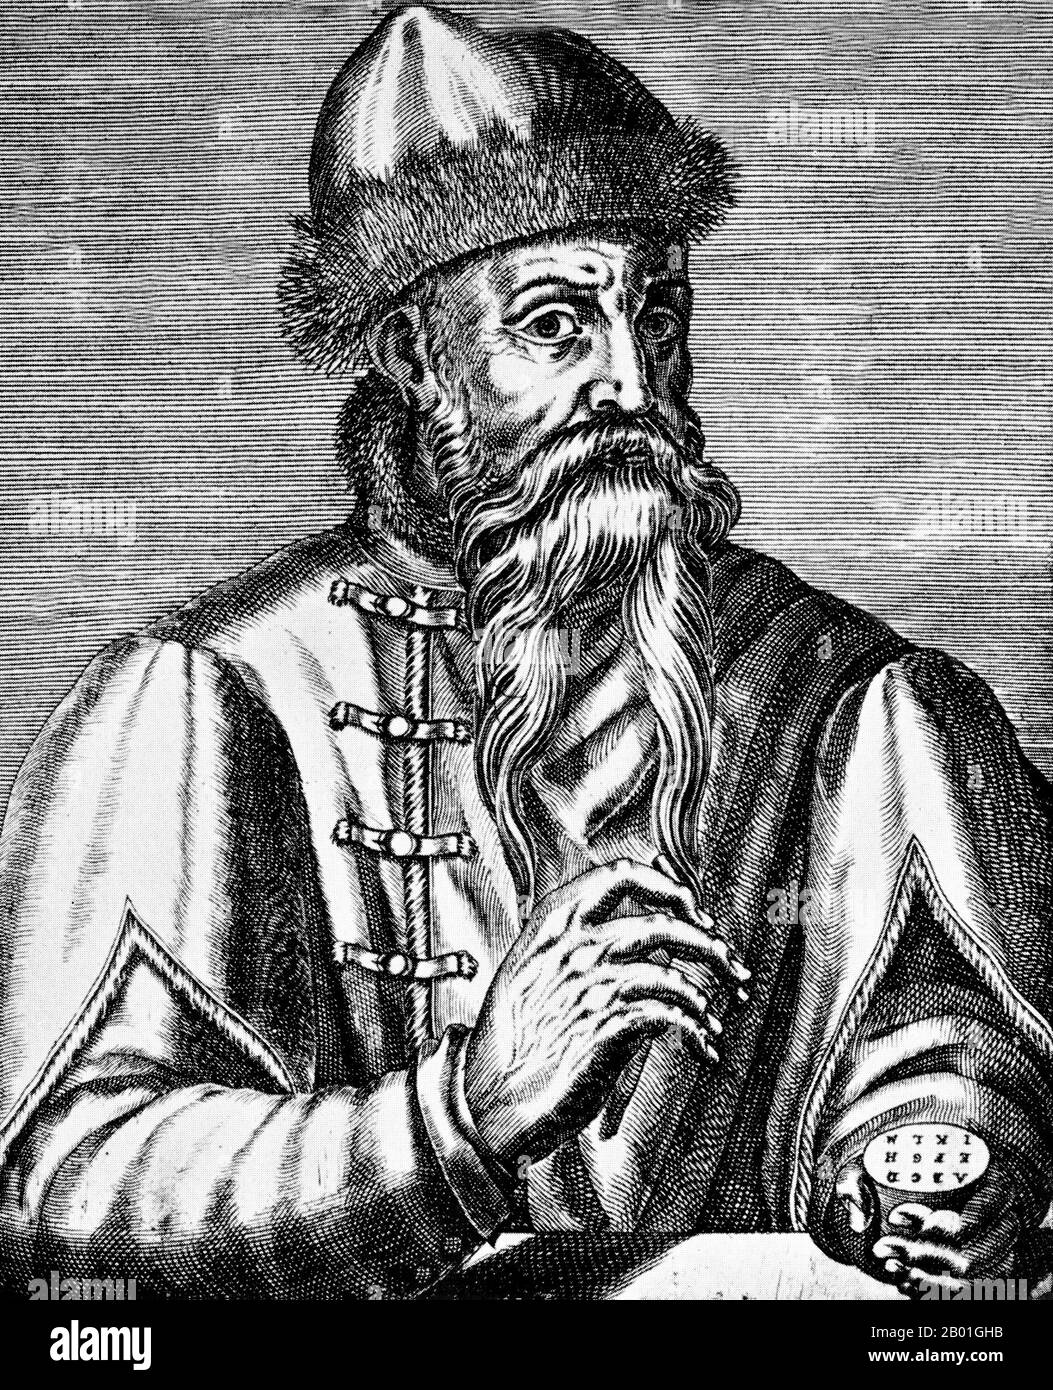 Germany: Johannes Gutenberg (c. 1393 - 3 February 1468), printer and publisher who introduced the first European printing press. Engraving by Nicolas de Larmessin (1632-1694), 17th century.  Johannes Gensfleisch zur Laden zum Gutenberg was a blacksmith, goldsmith, printer, and publisher who introduced the printing press. His usage of movable type printing started the Printing Revolution and is widely regarded as the most important event of the modern period. It played a key role in the development of the Renaissance, Reformation and the Scientific Revolution. Stock Photo